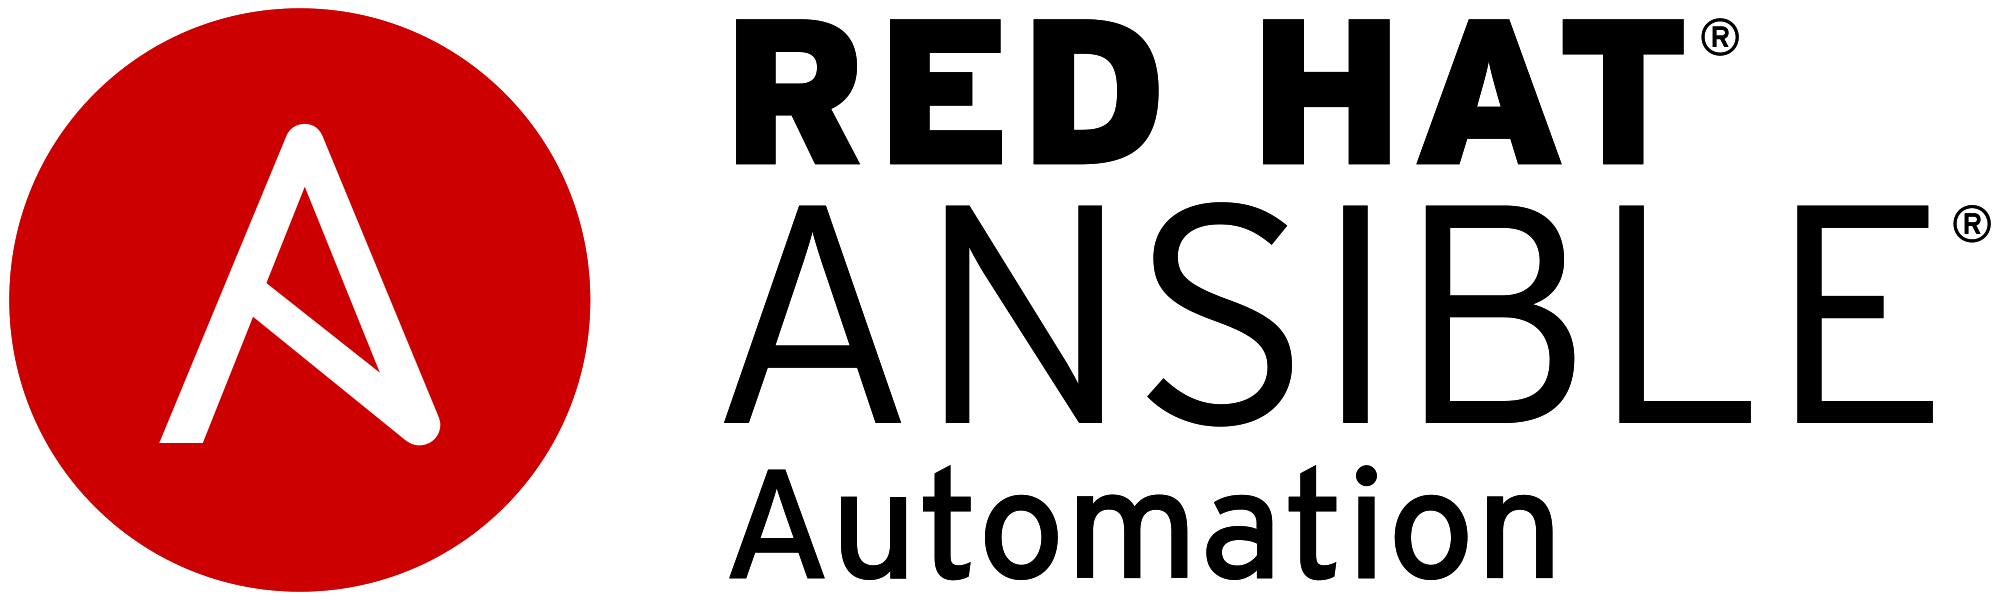 Ansible Logo - Red Hat Ansible Automation - Tech Field Day